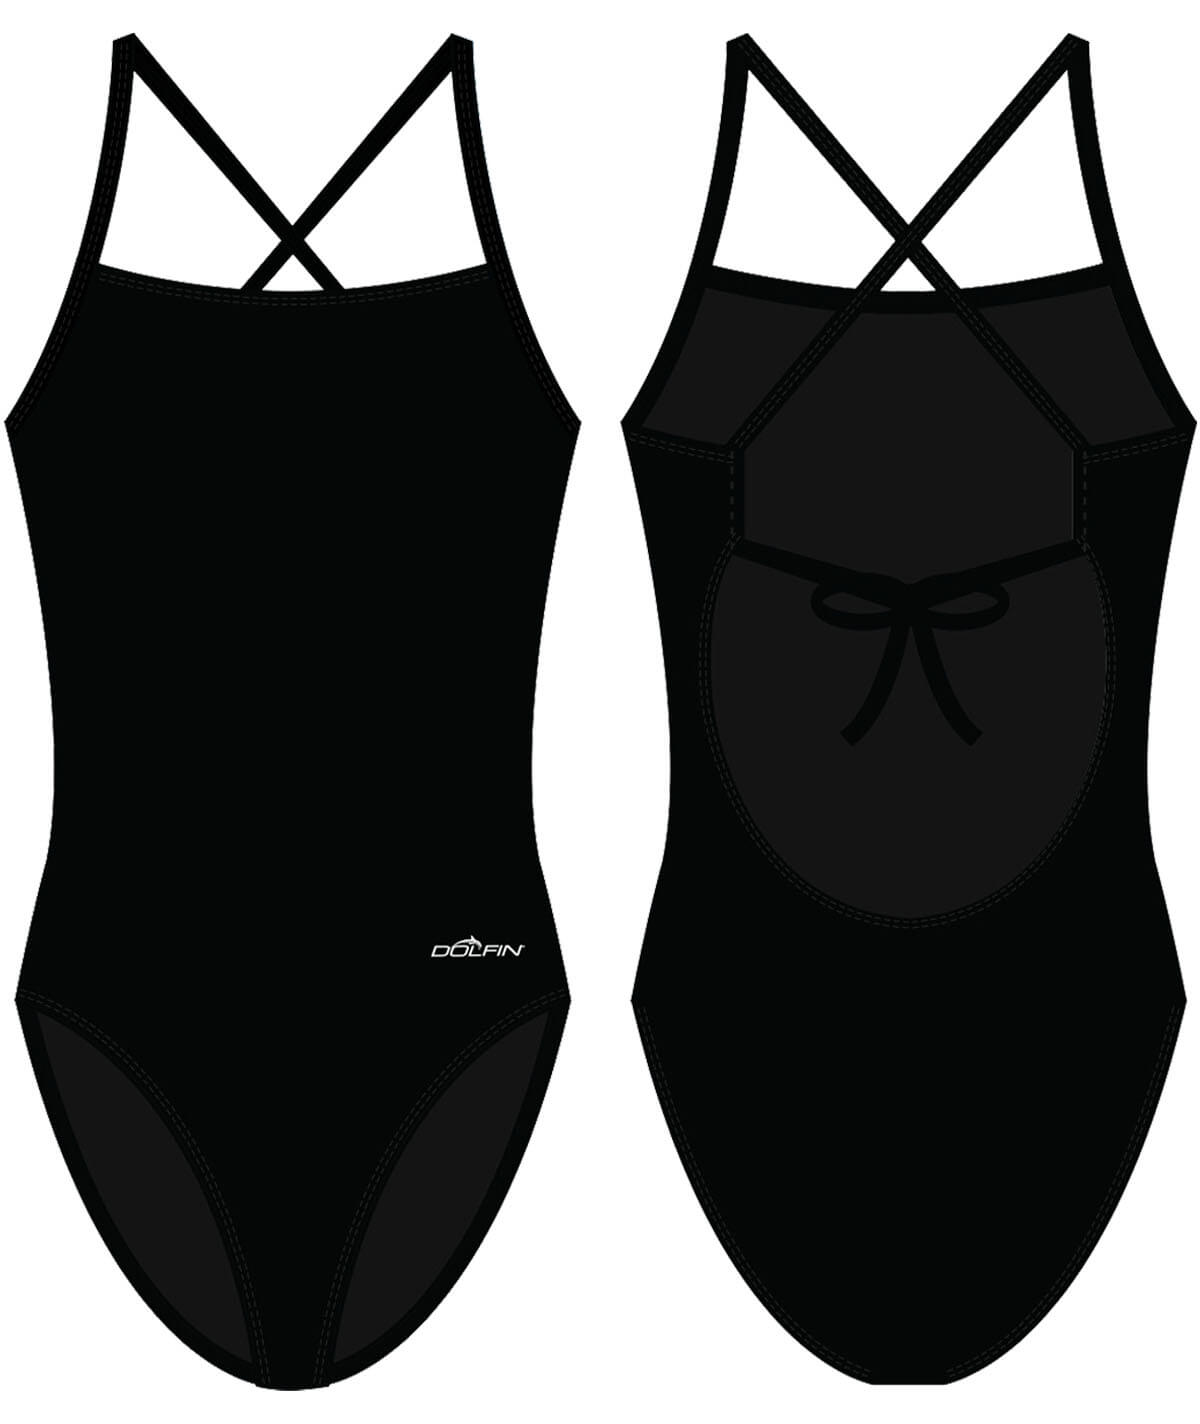 Fit Kit - Female Sublimated Tie Back One Piece